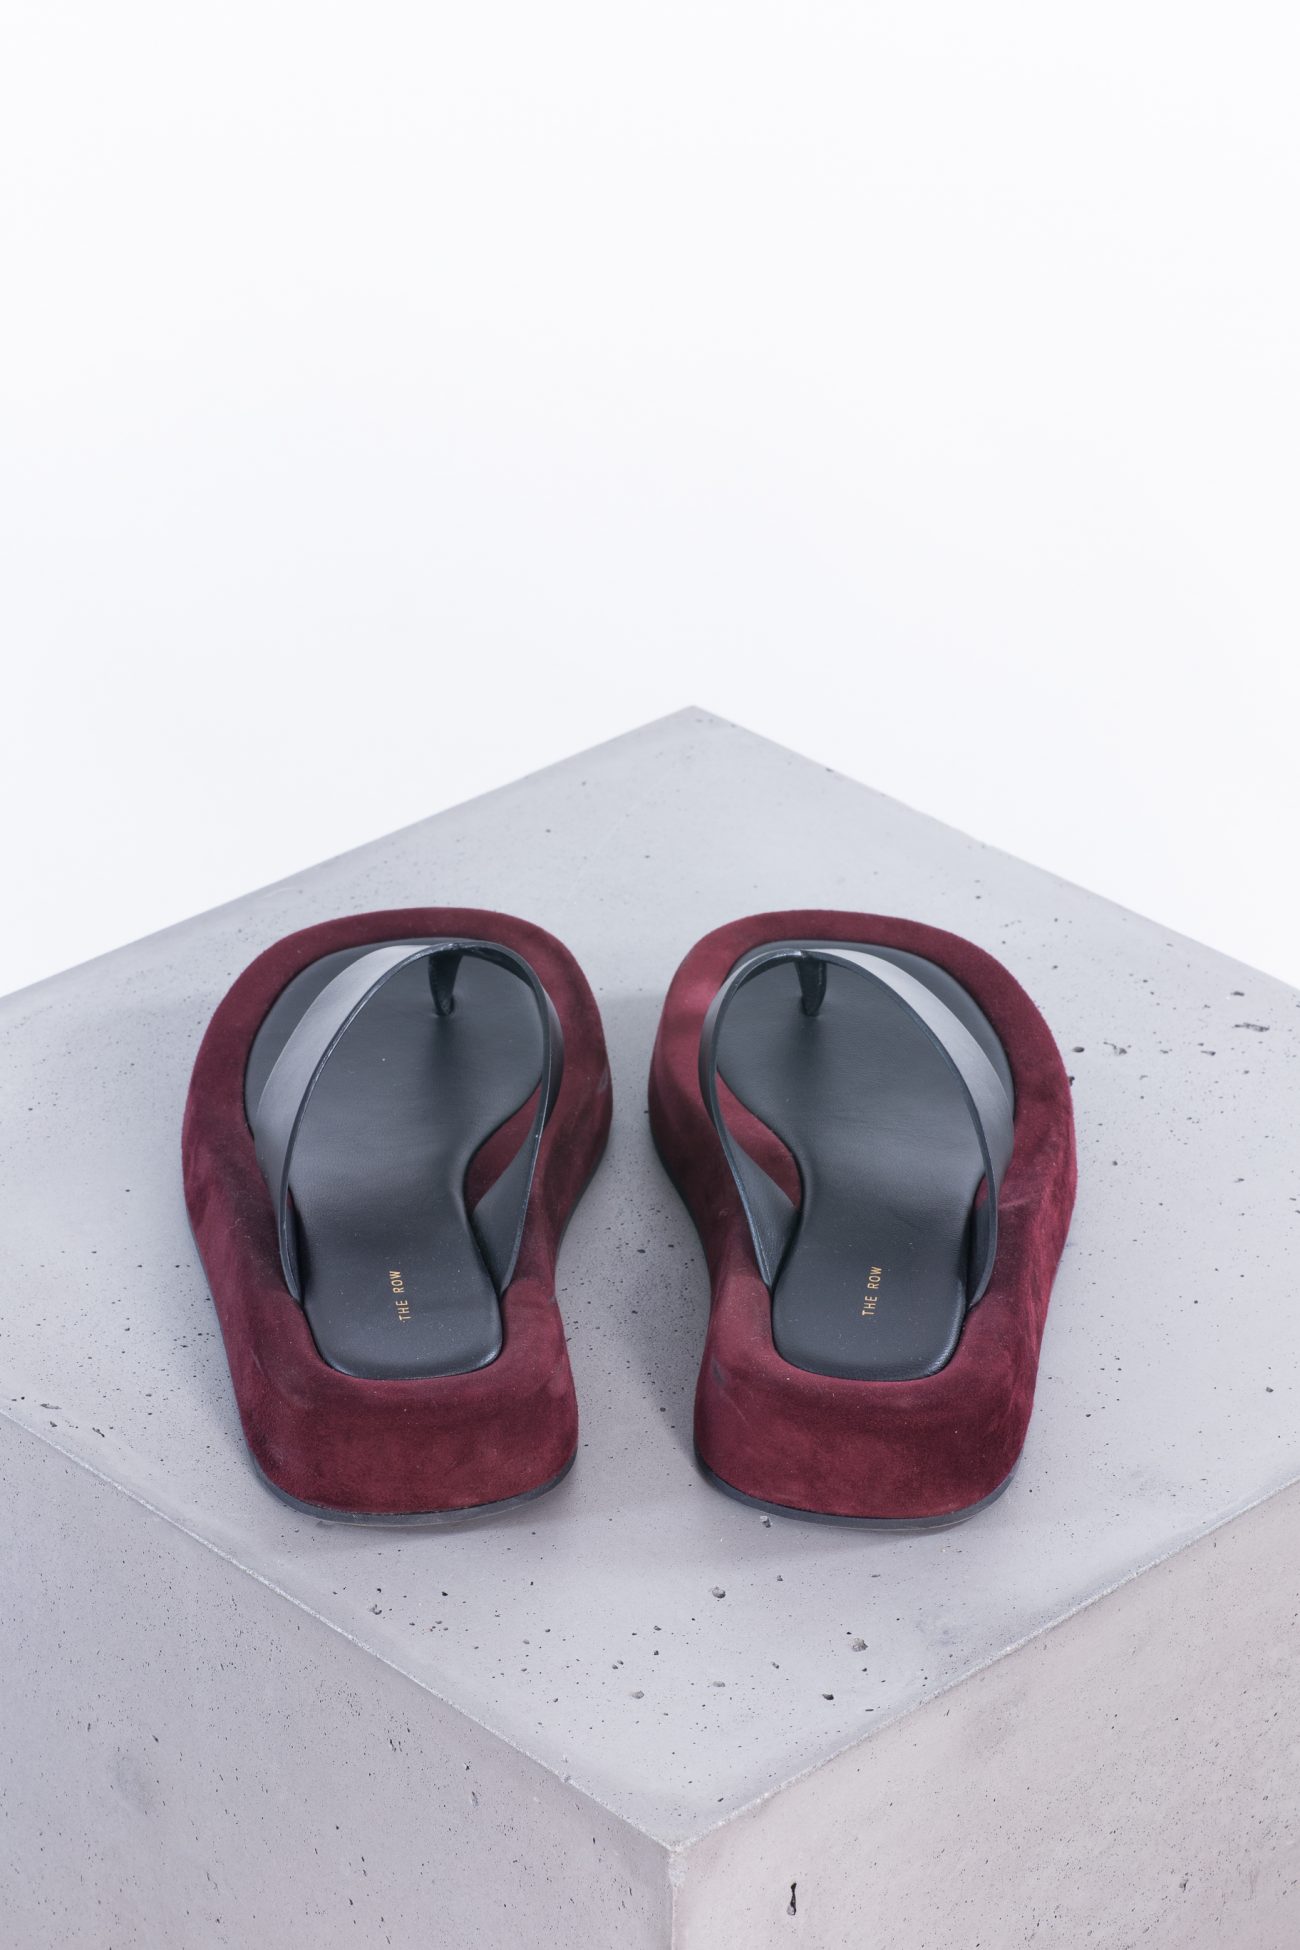 The Row Ginza Sandals